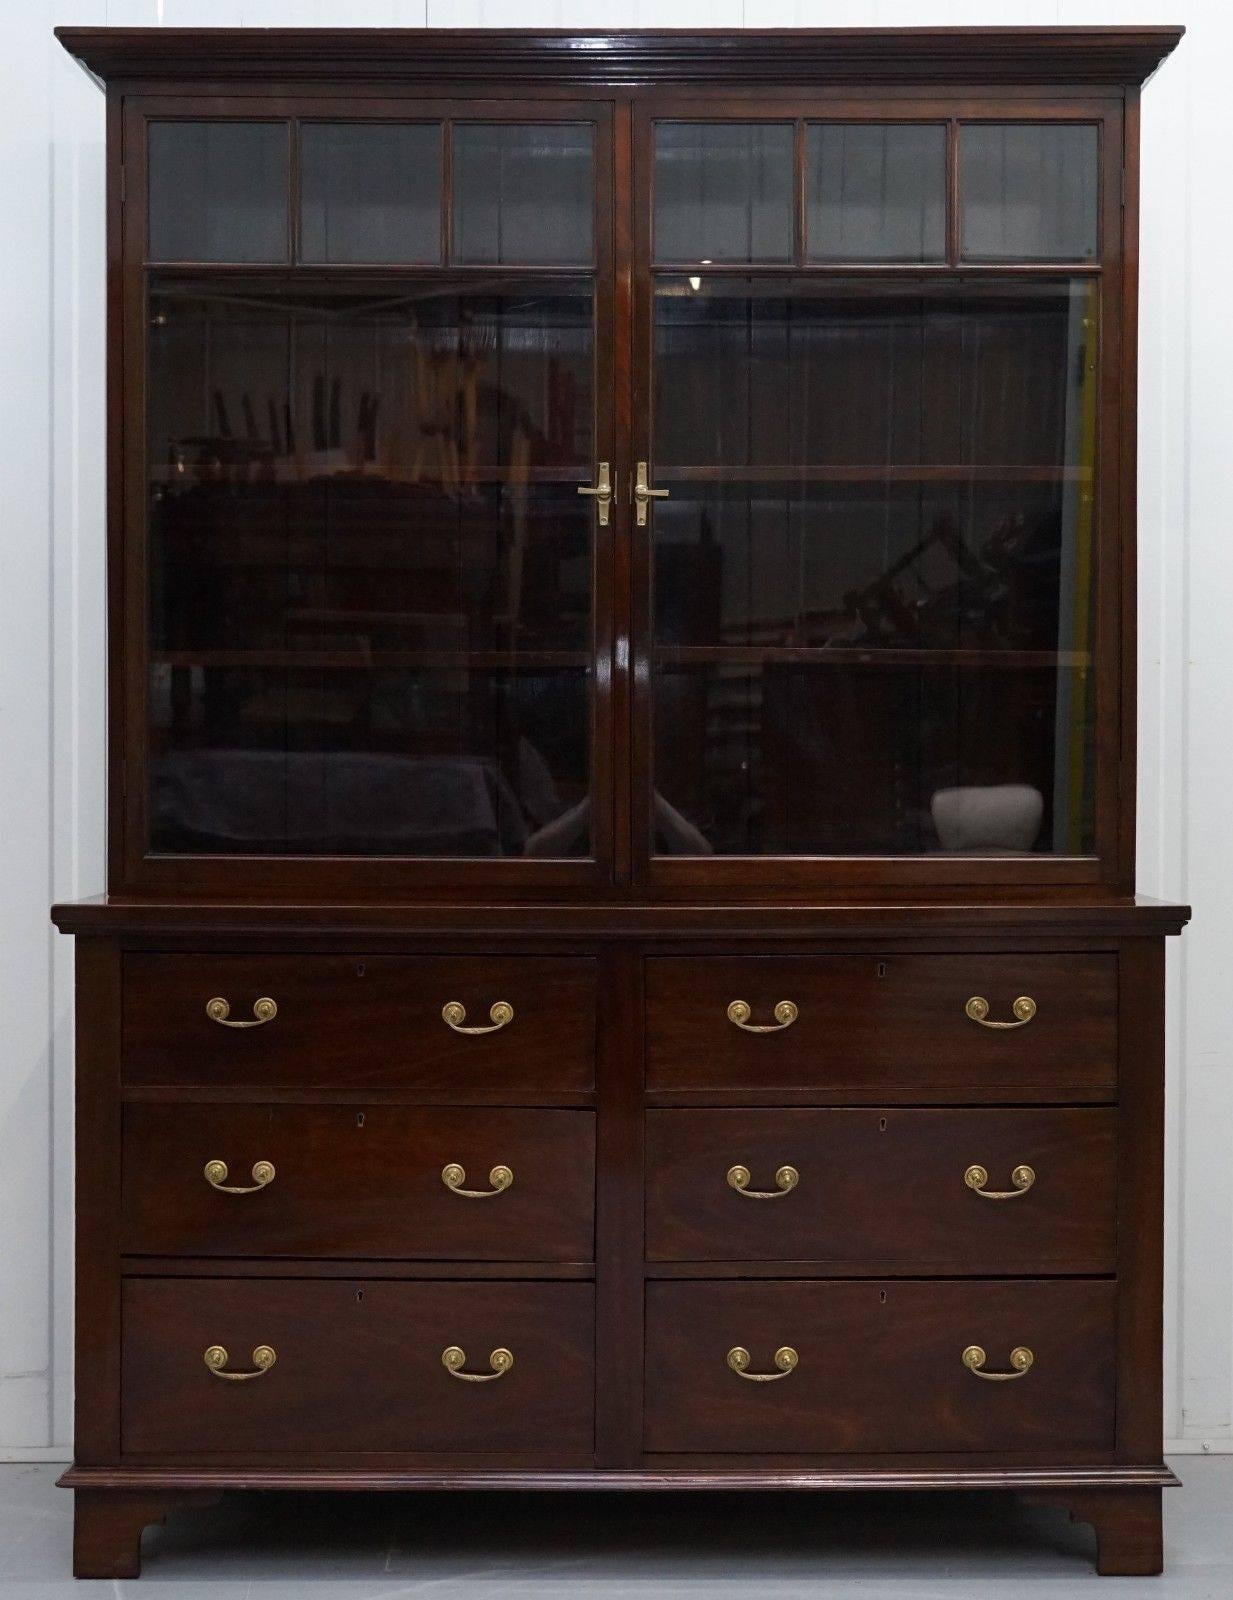 We are delighted to offer for sale this lovely handmade in England solid mahogany library bookcase cabinet.

A very good looking and well-made piece in period condition, the glass and all timber is original, the wood has warped on one or two of